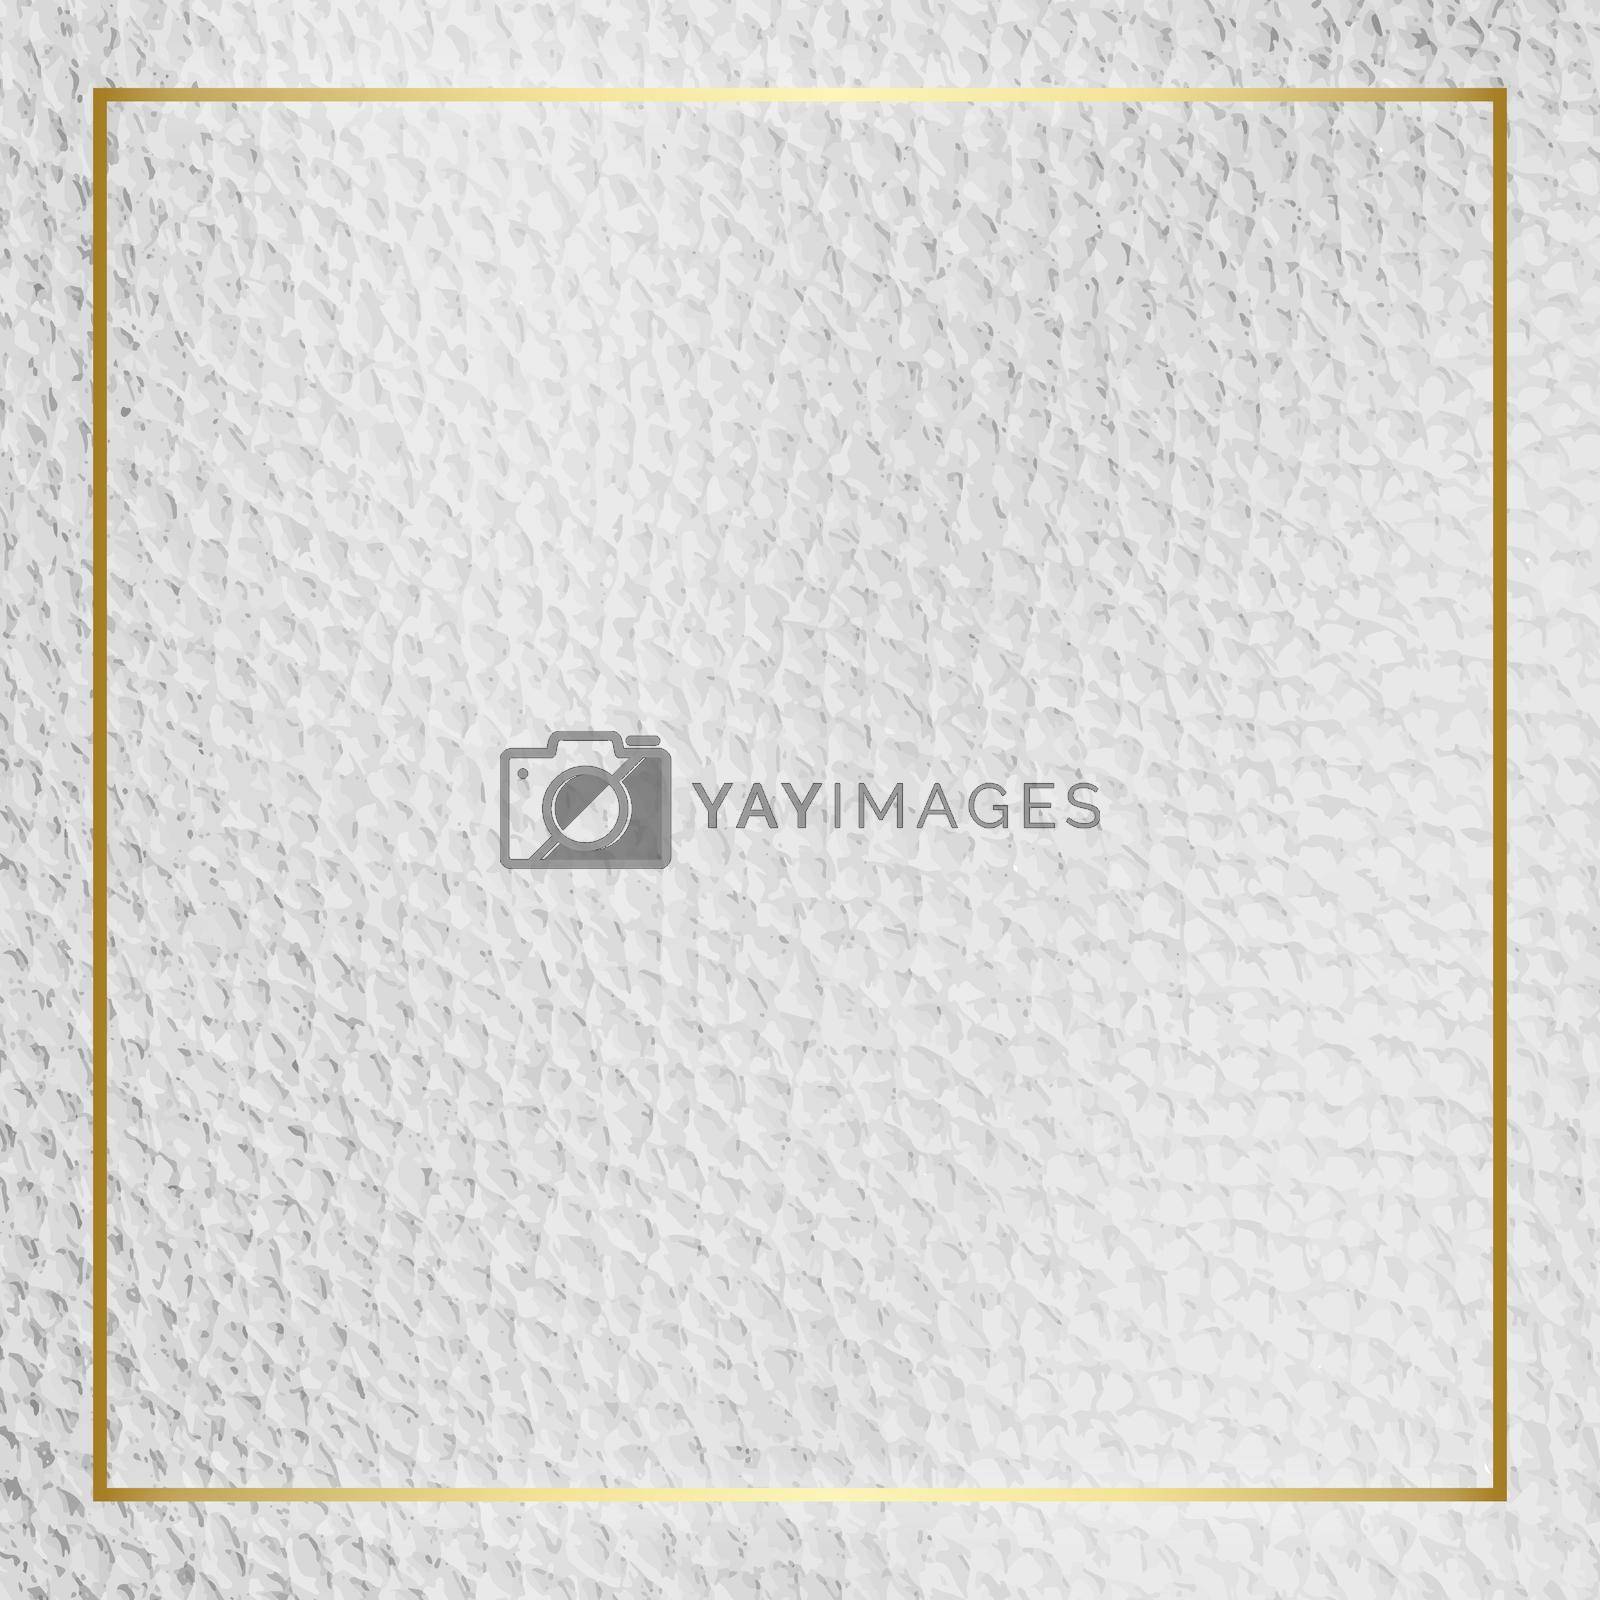 Royalty free image of Gold frame on white leather background vector by vectorart